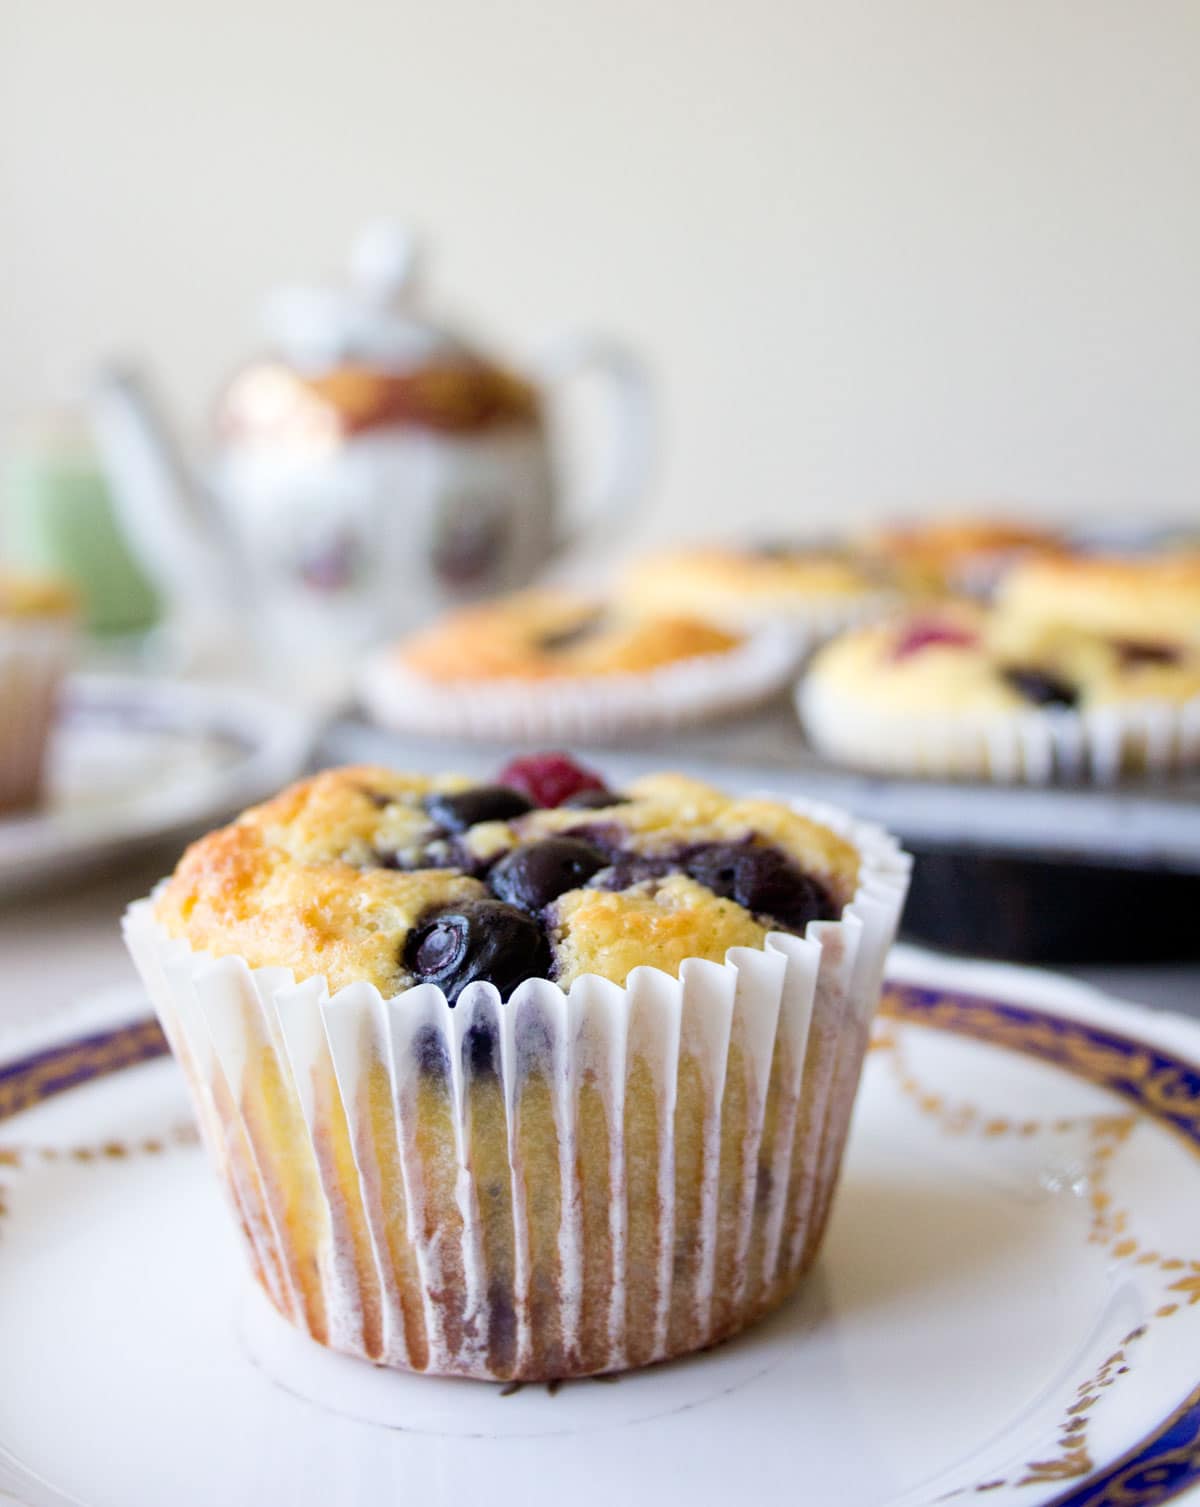 Almond flour muffin with blueberries and raspberries in a paper muffin case on a plate.